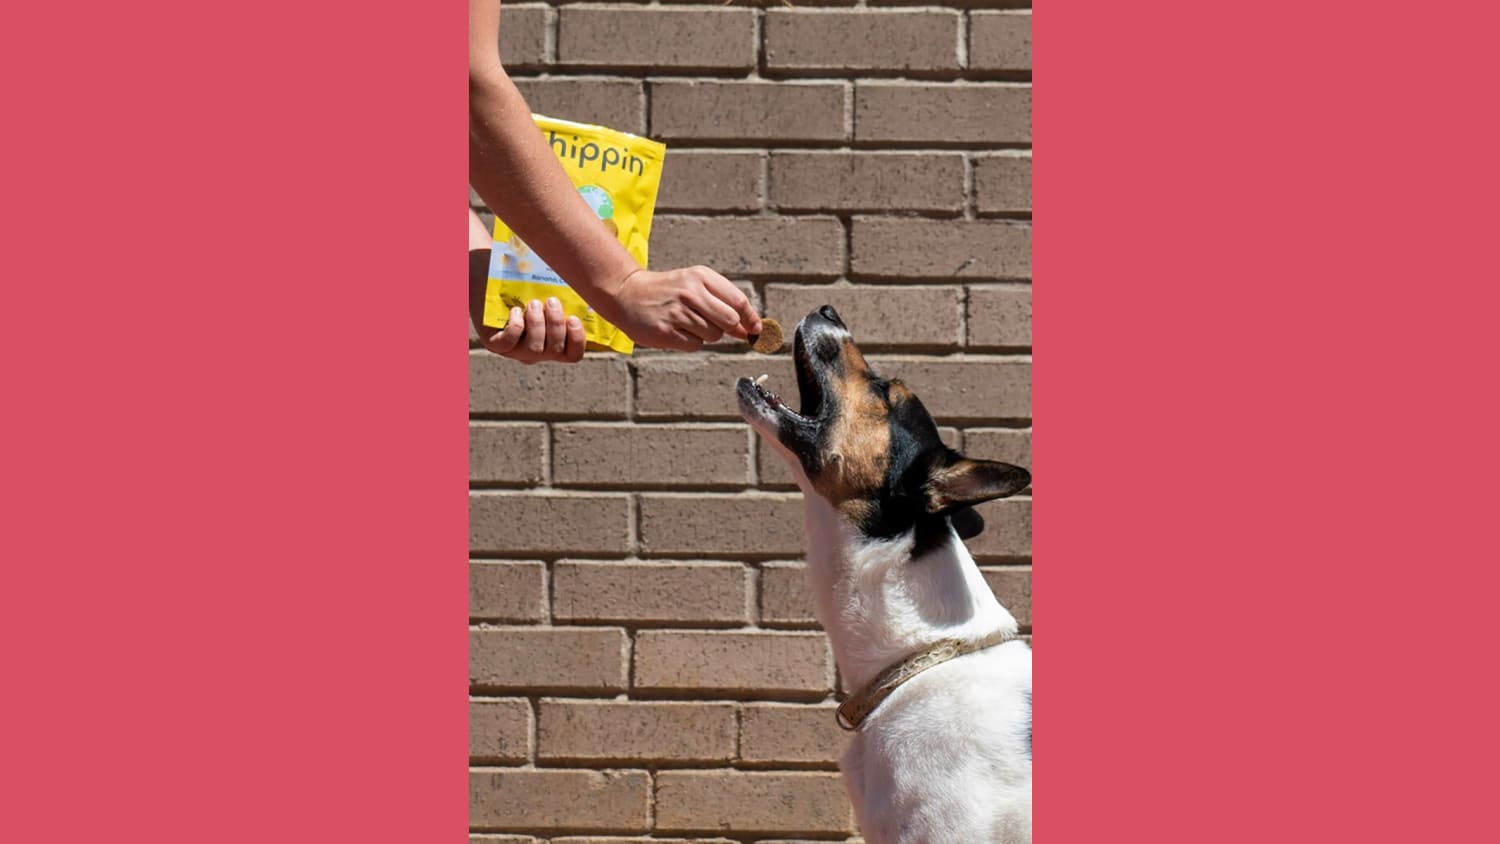 A White person, only their forearms are in the frame of the image, in one hand they are holding a yellow packet of Chippin dog treats. Their other hand is offering a treat to a dog that has its mouth wide open in anticipation.